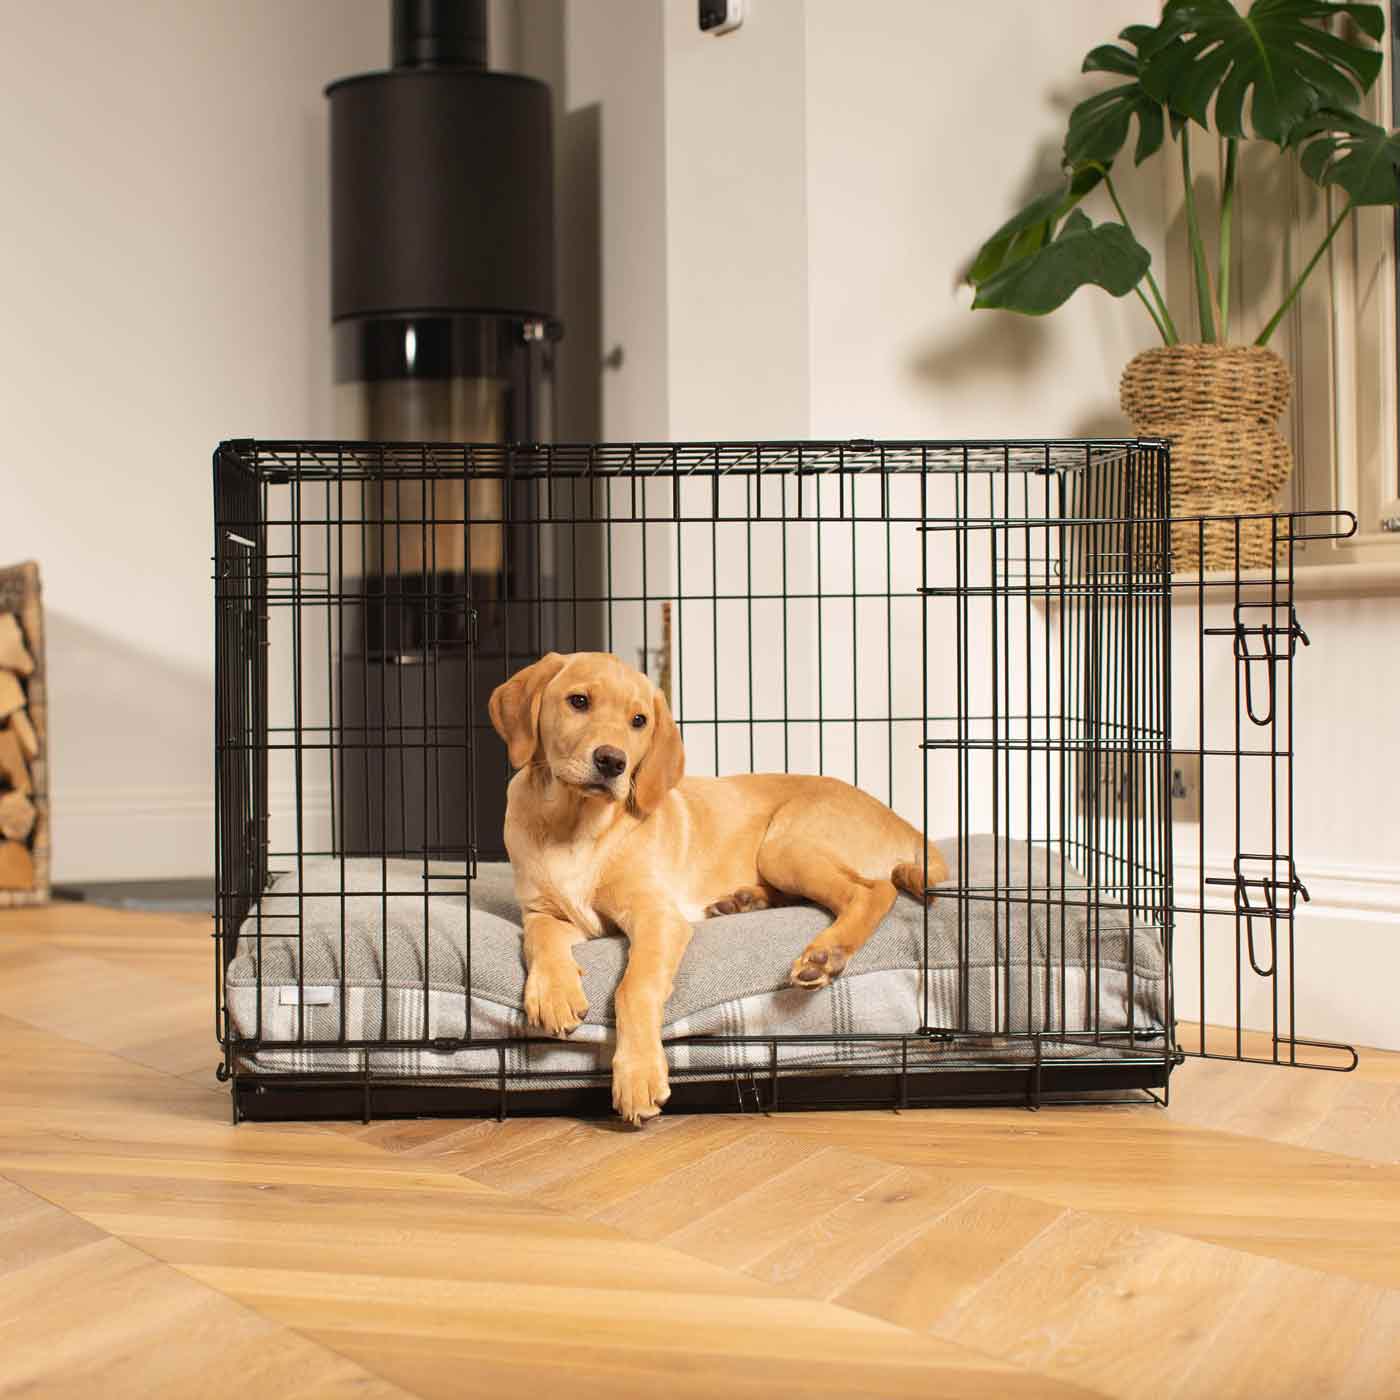 Luxury Dog Crate Cushion, Balmoral Dove Grey Tweed Crate Cushion The Perfect Dog Crate Accessory, Available To Personalise Now at Lords & Labradors